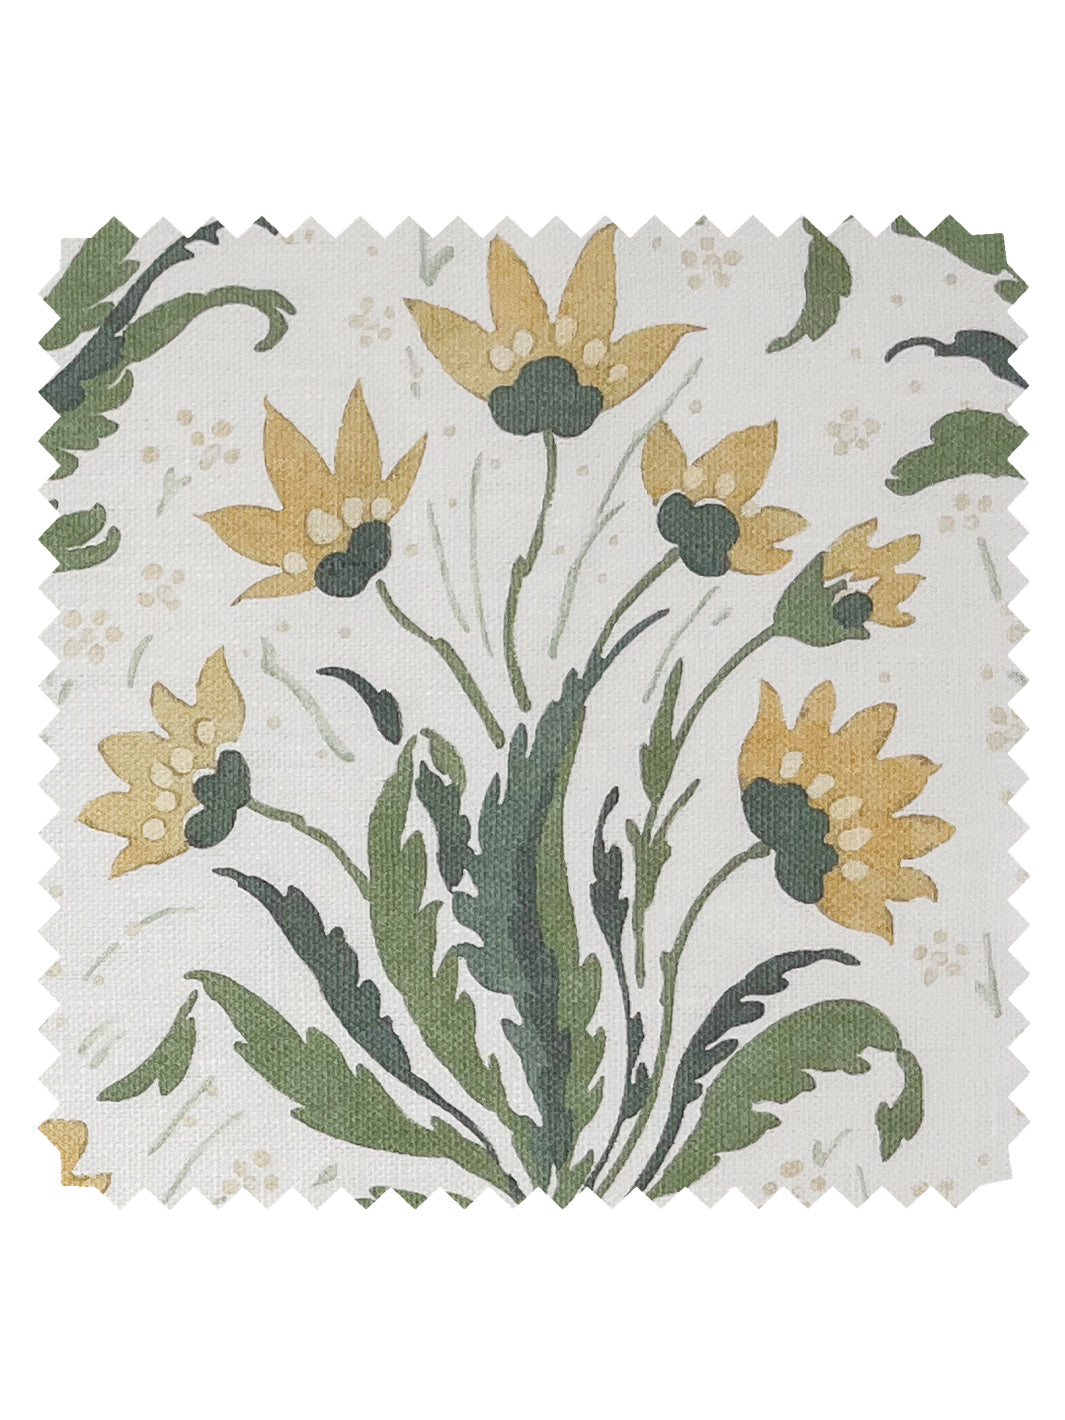 'Hillhouse Floral Multi' Linen Fabric by Nathan Turner - Gold Green